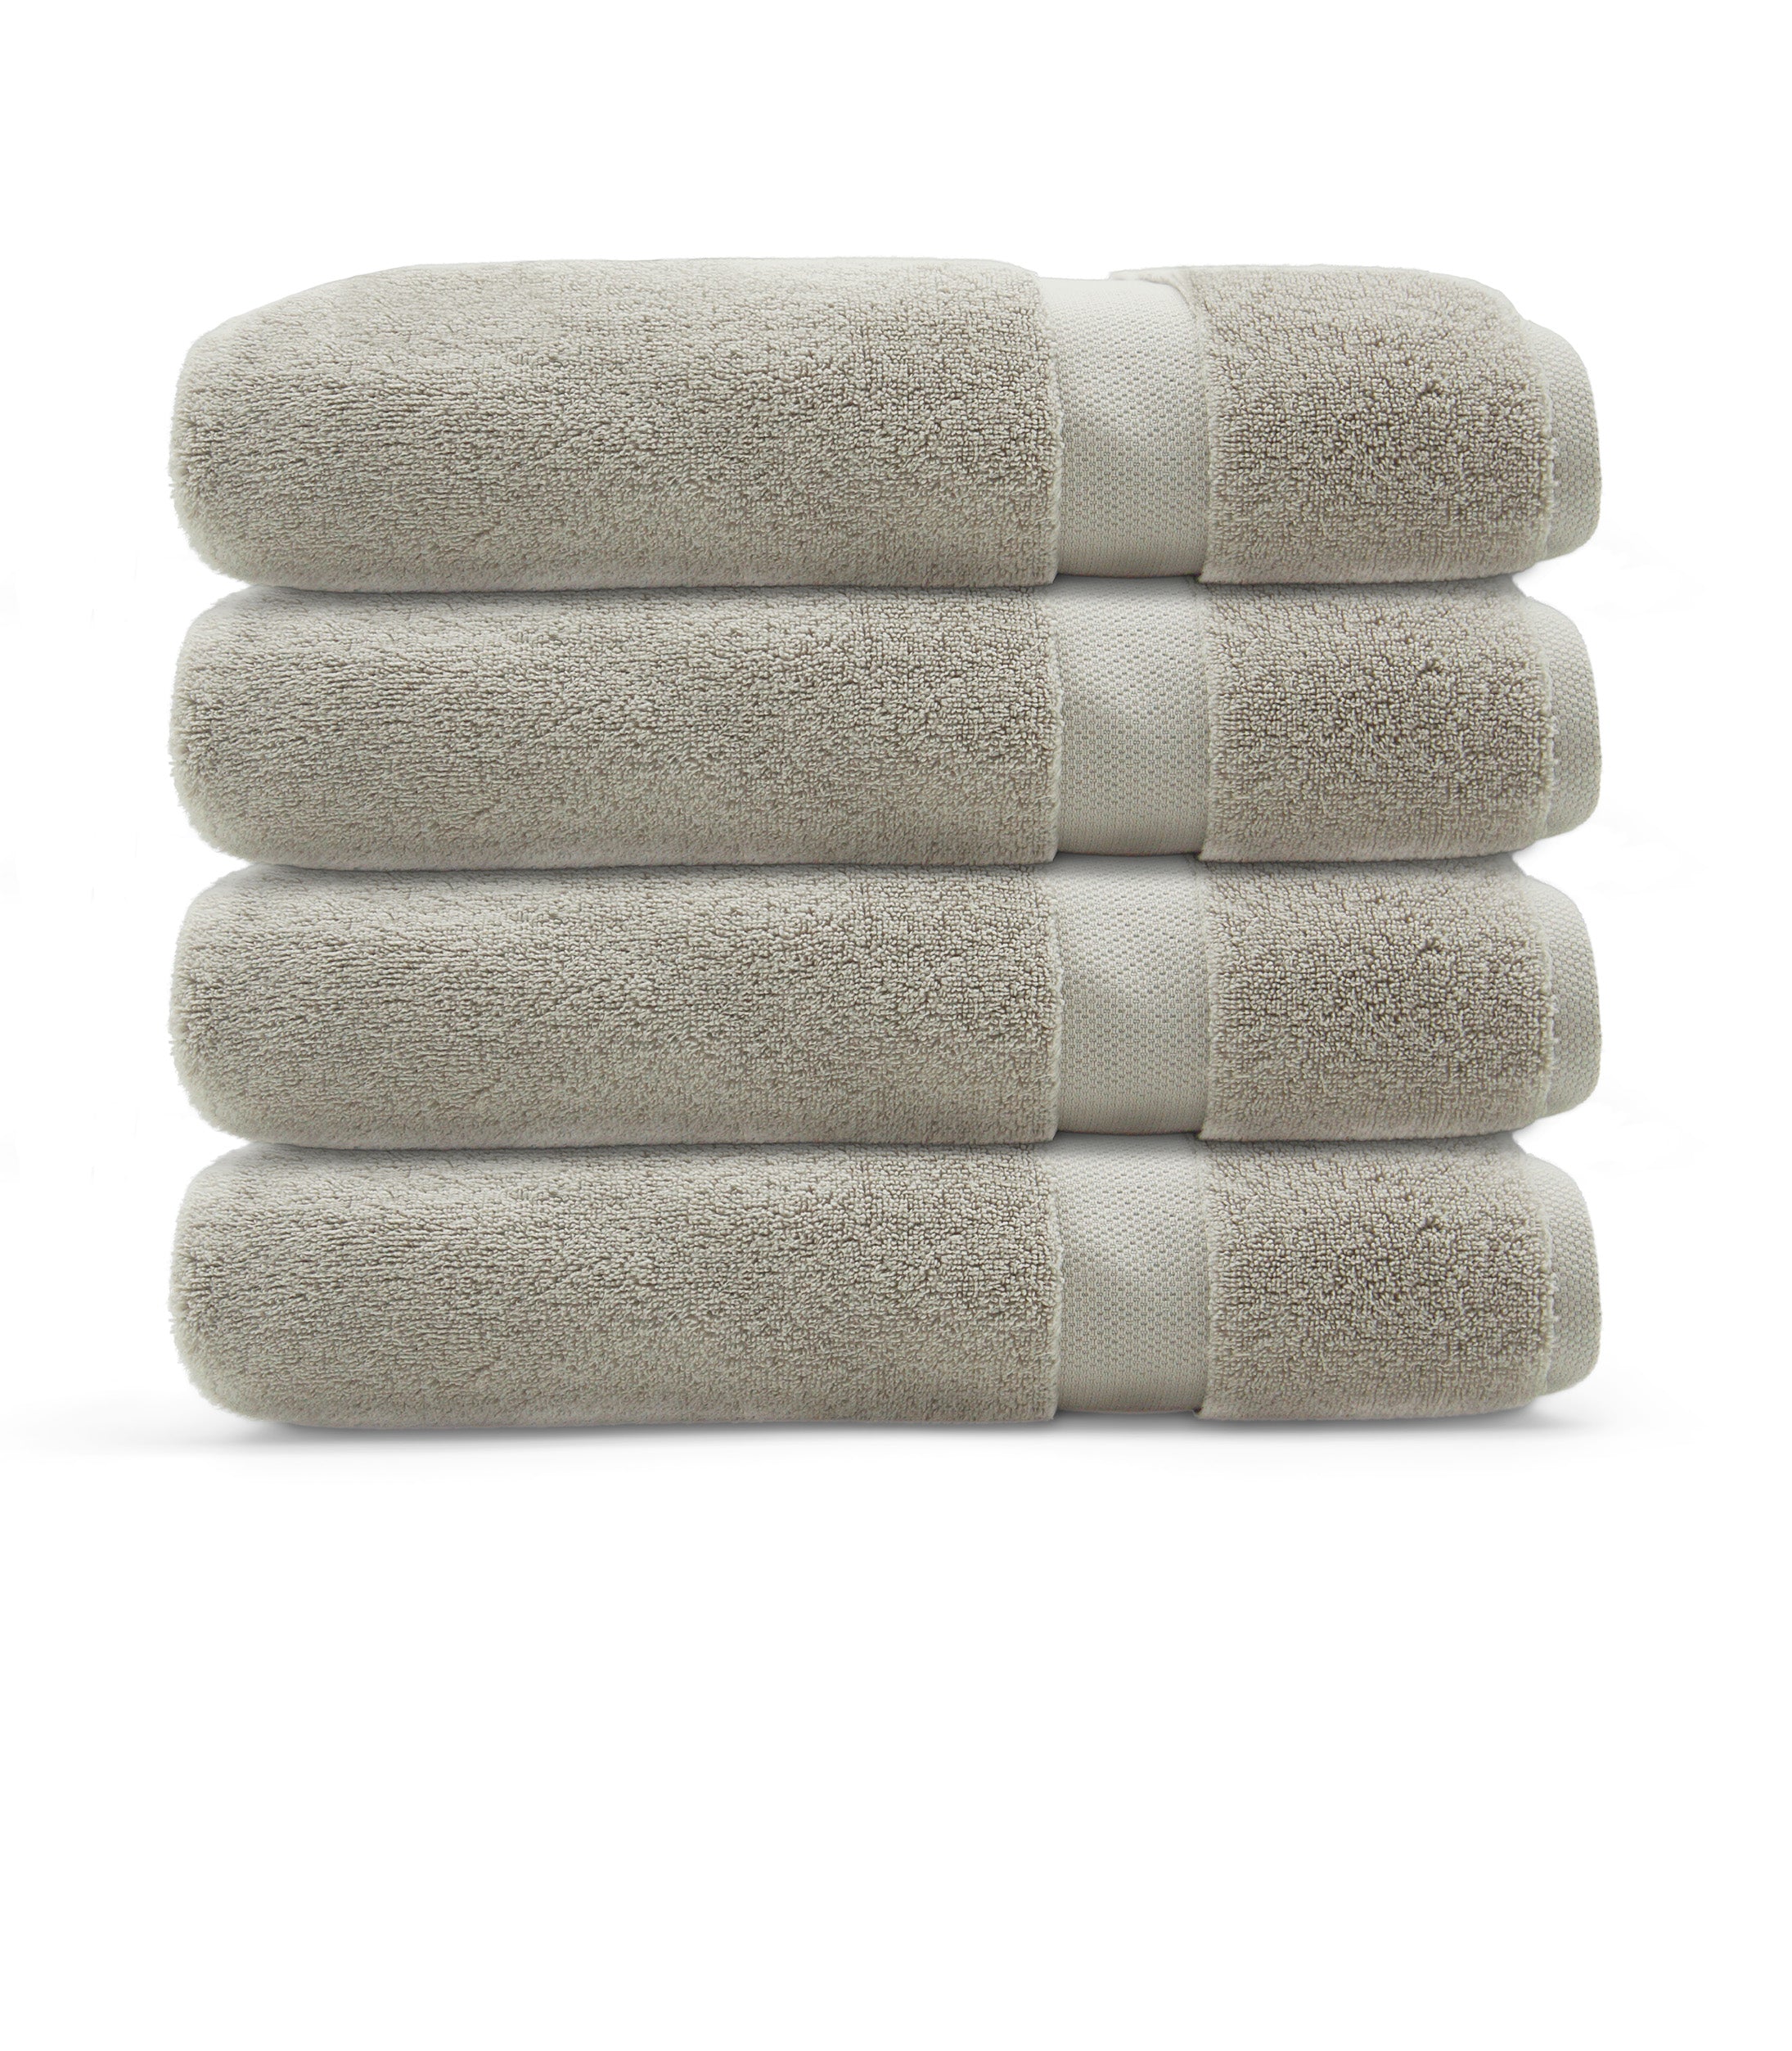 How to Choose the Best Bath Towels for Ultimate Comfort and Durability